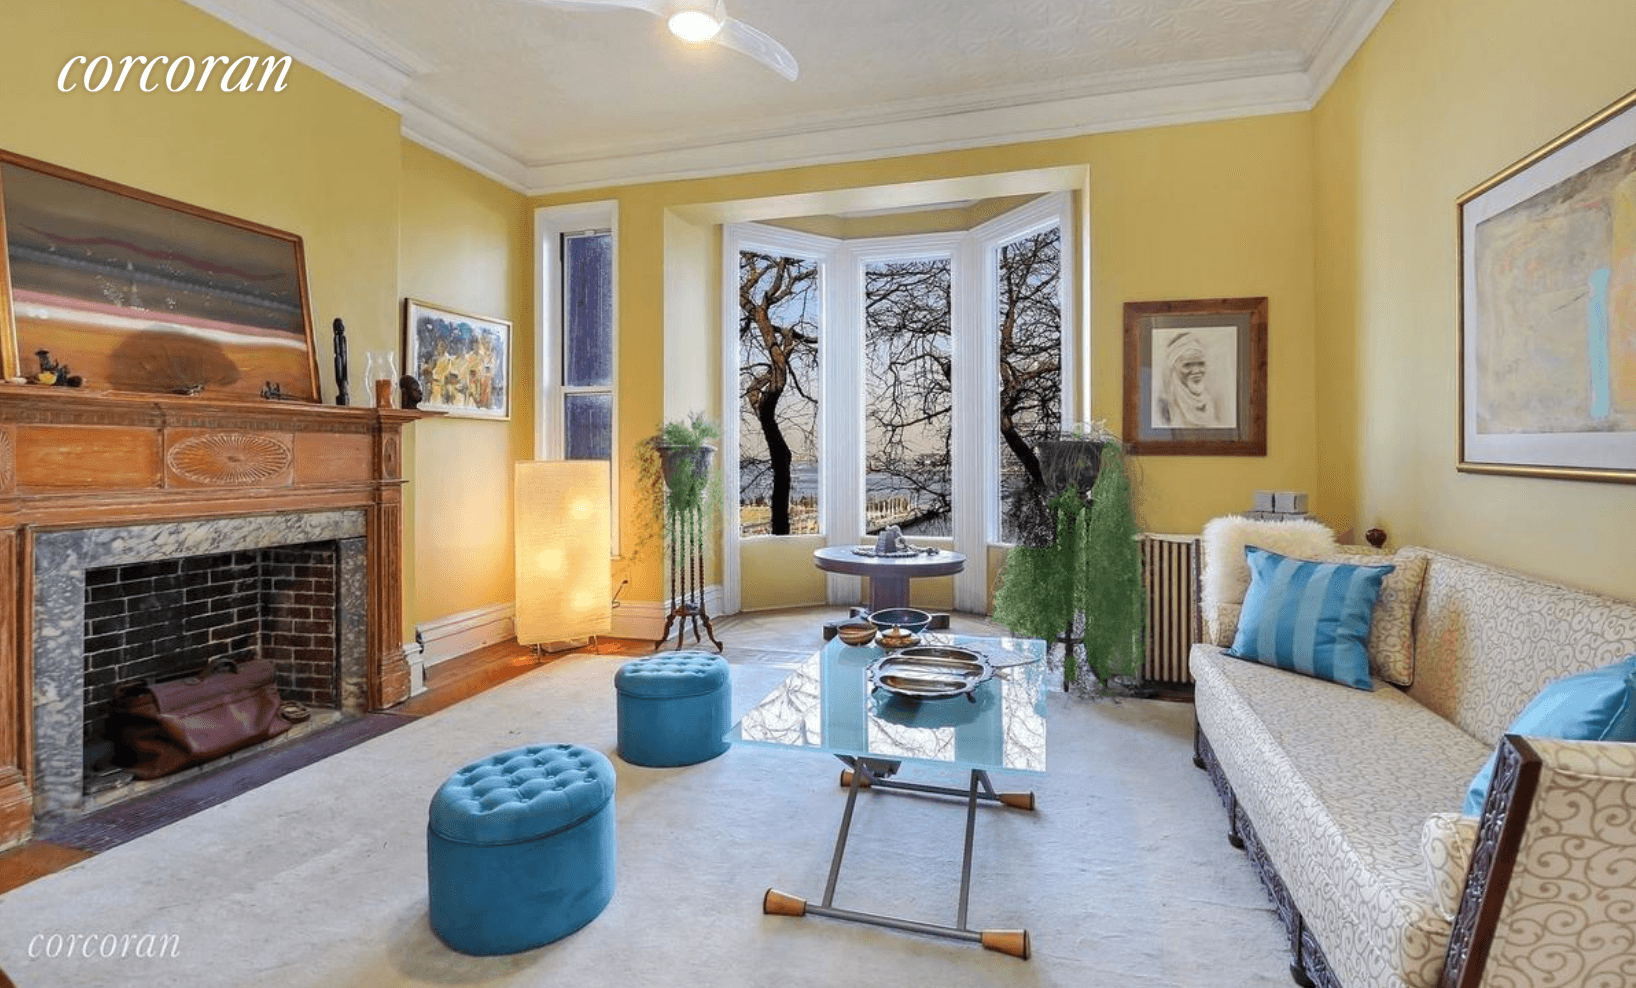 Absolutely A to die forA two bedroom, parlor level apartment located in a gorgeous brownstone on THE most beautiful part of historic Brooklyn HeightsA.